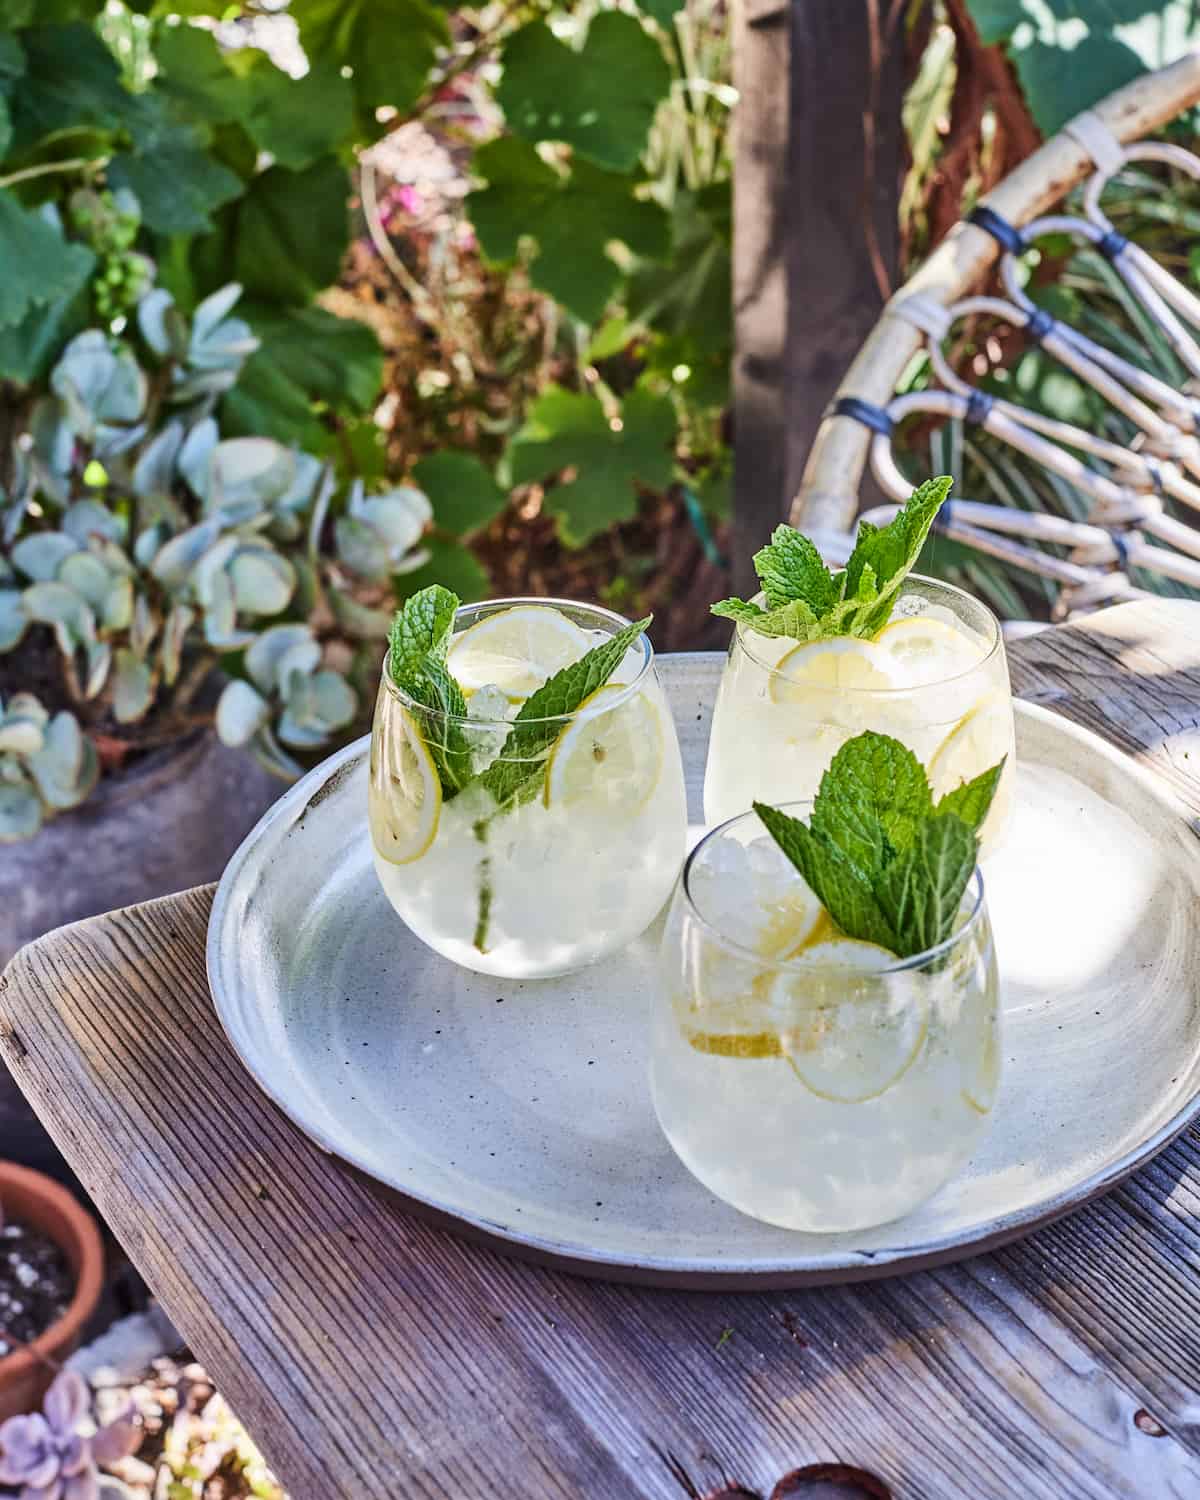 Outside on a wooden table under a lush green pergola there are three stemless wine glasses on a round metal serving tray filled with a White Wine Spritzer over ice with lemon slices and sprigs of mint for garnish. 